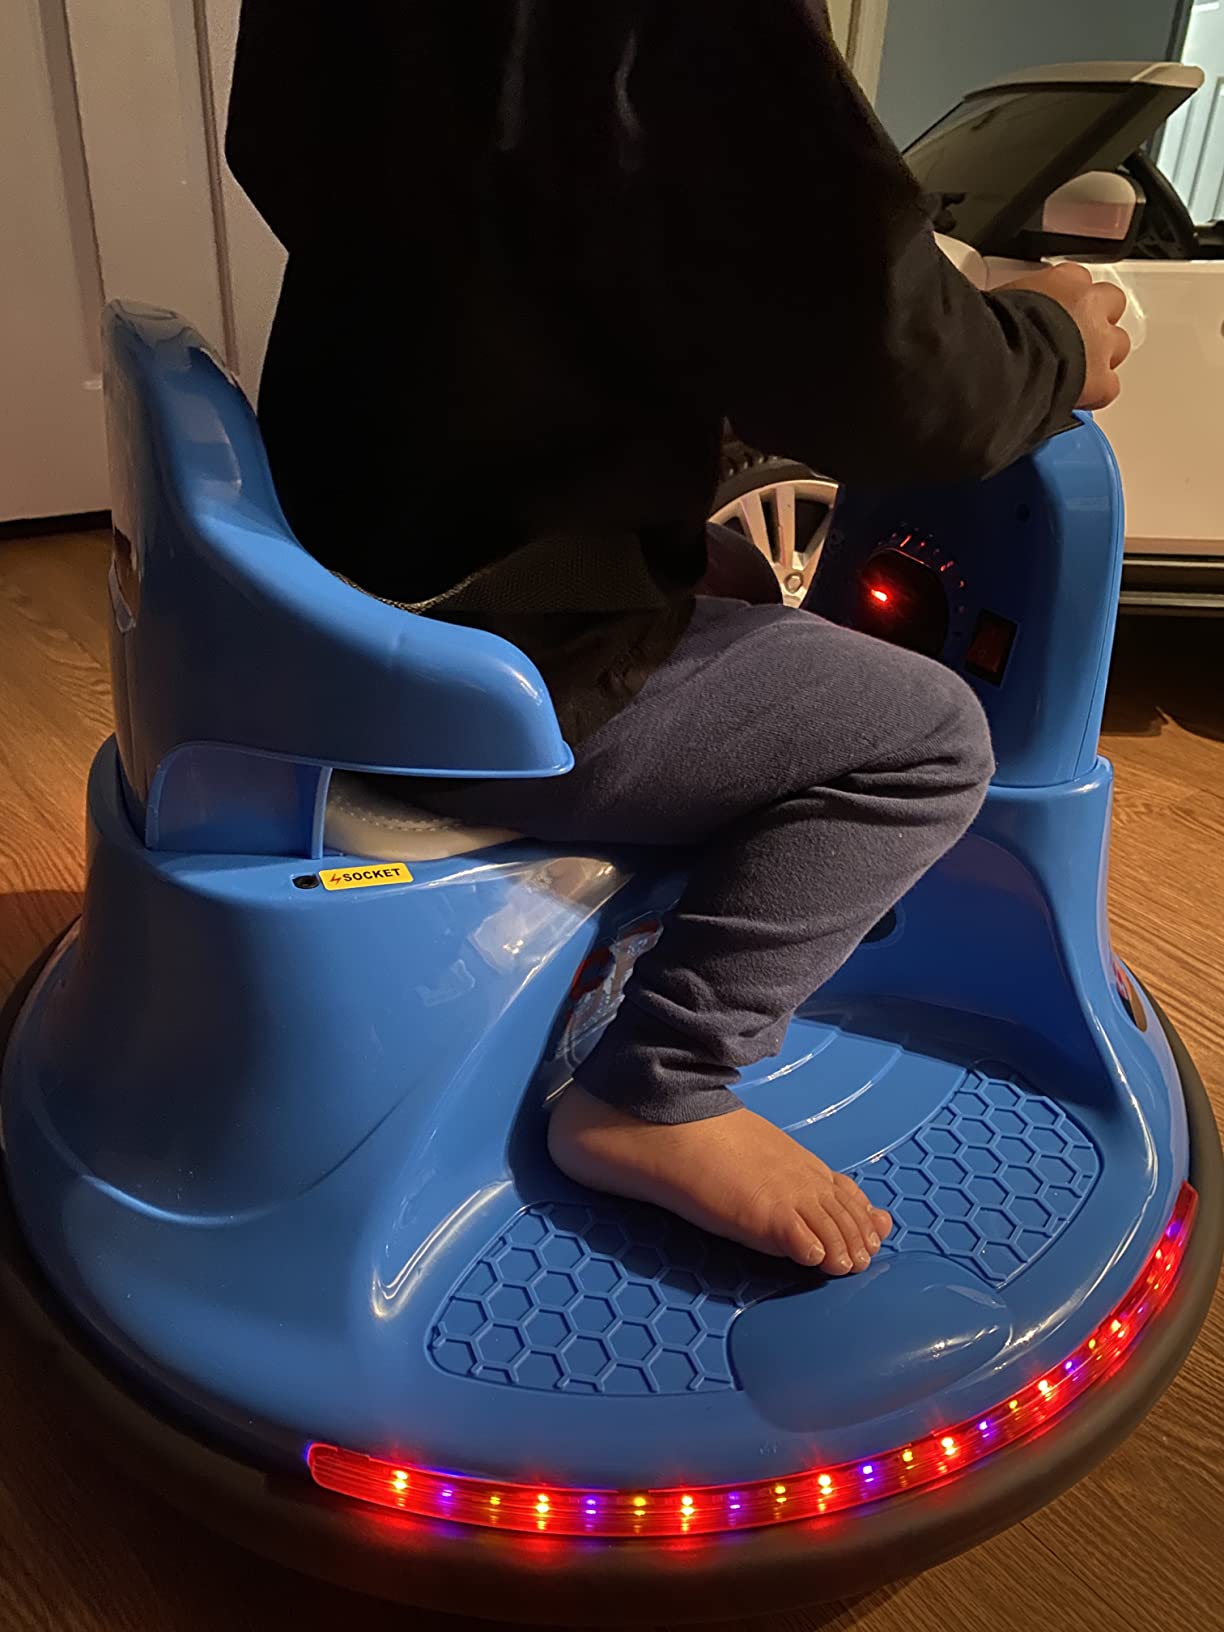 Perfect for toddler, works great